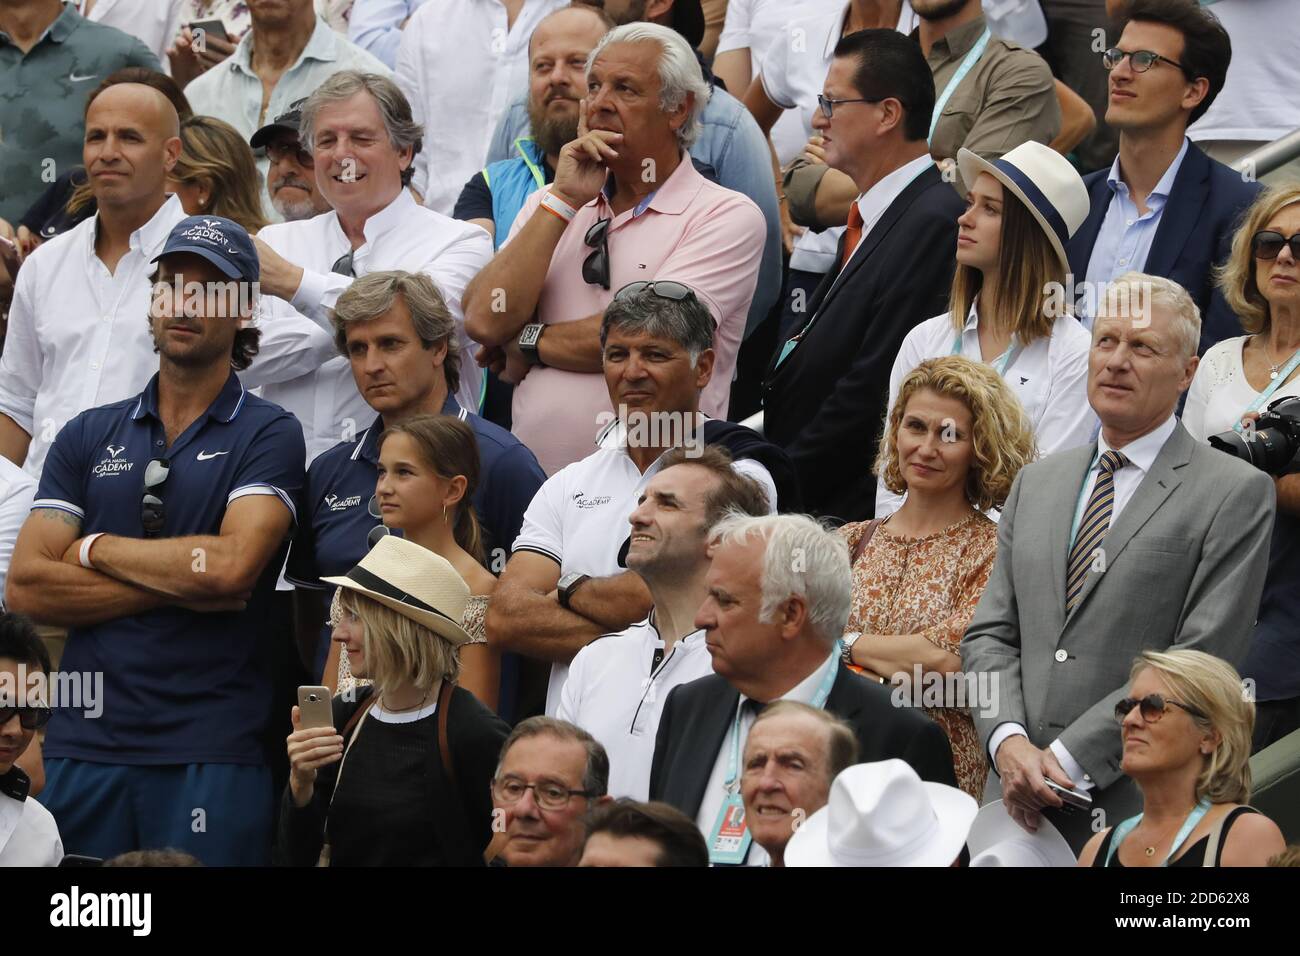 Tennis French Open Roland Garros, Paris, France 3/6/09 Footballer Robert  Pires (2nd R) In The Crowd During The Quarter Finals Mandatory Credit:  Action Images Scott Heavey Stock Photo Alamy | hcet.in